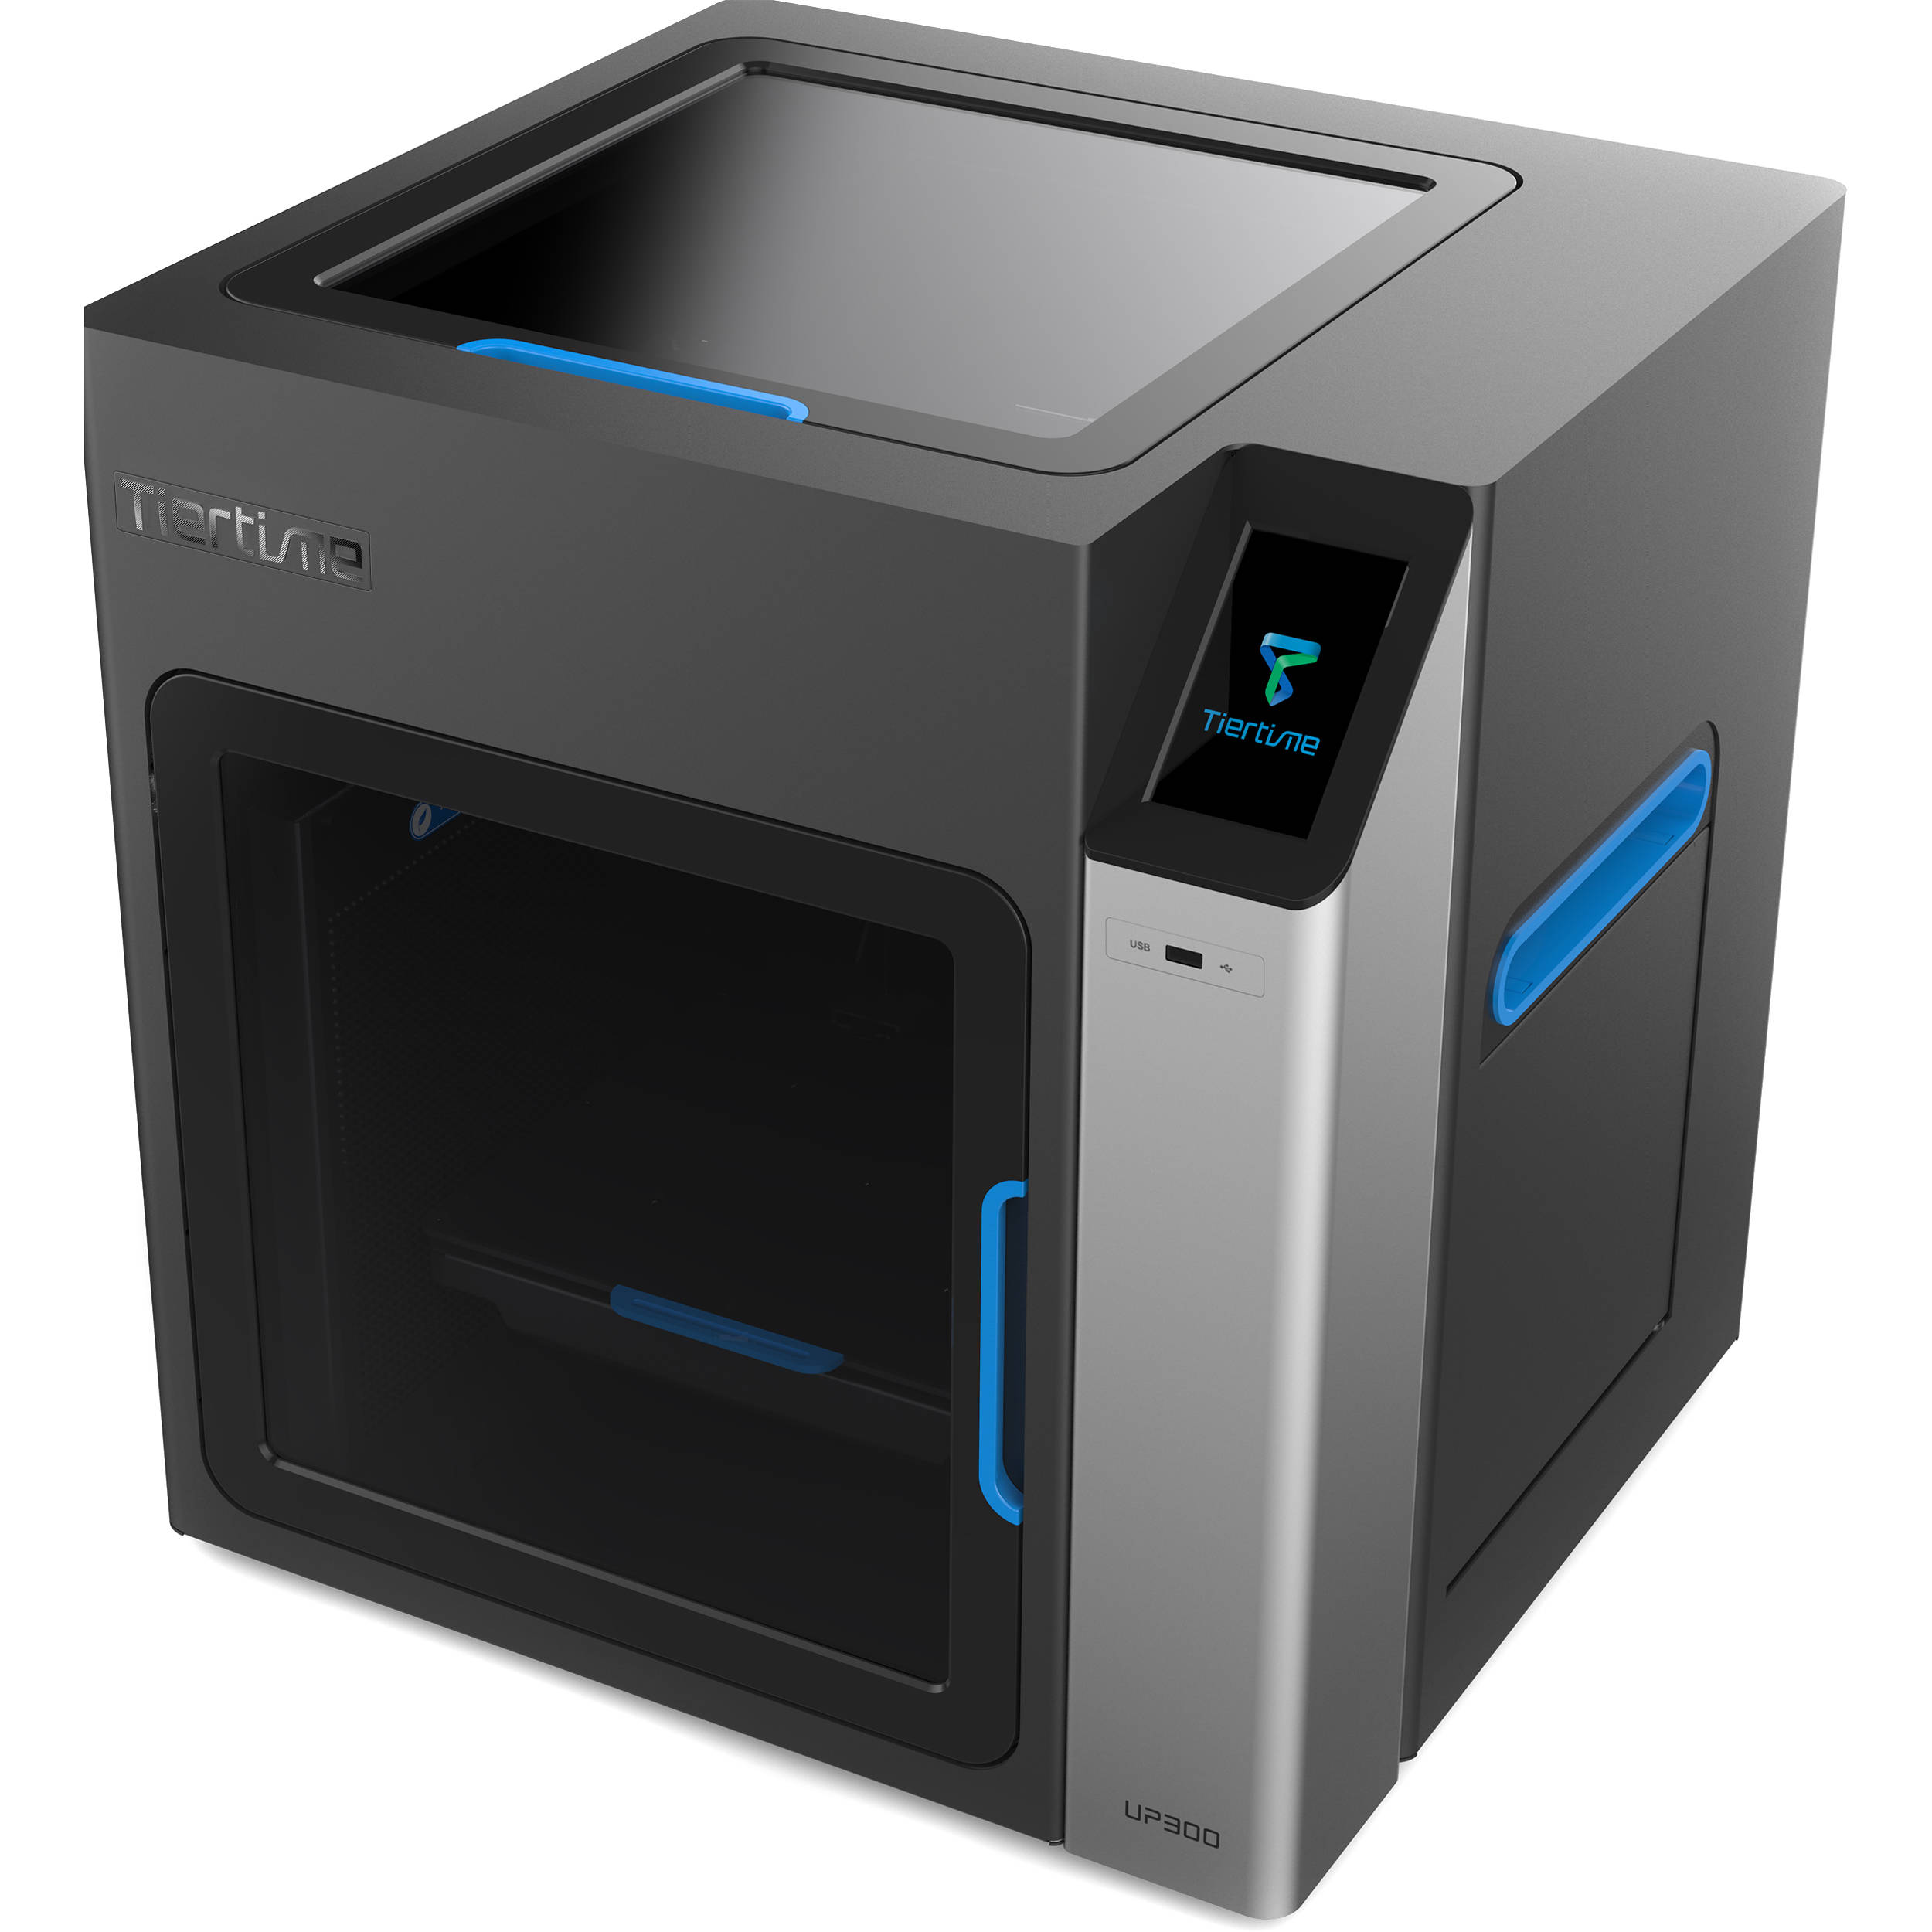 Tiertime UP300 - Tiertime UP300 3D printers - PriceIt3D